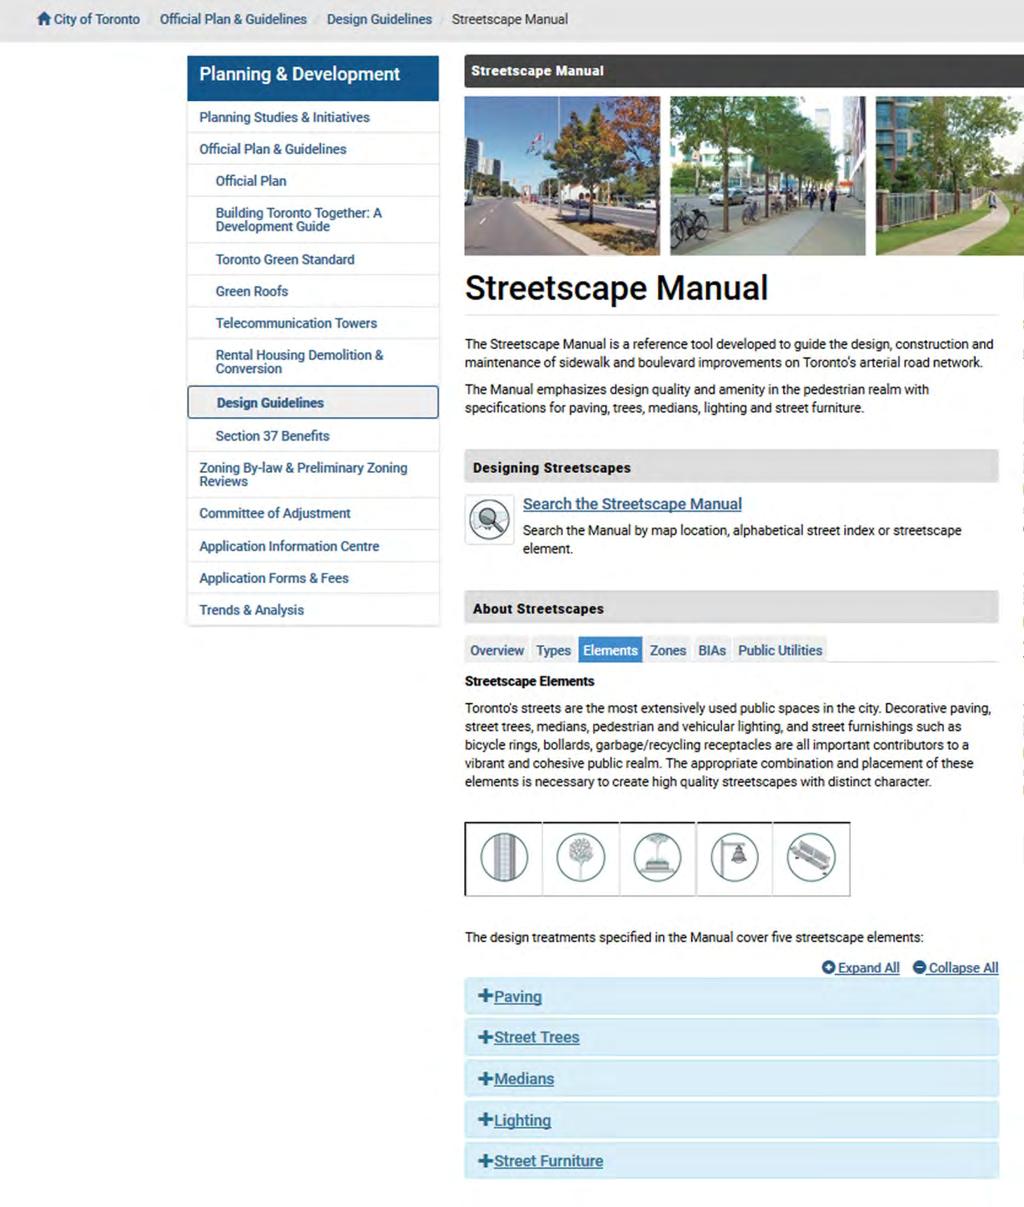 To learn more about each streetscape element